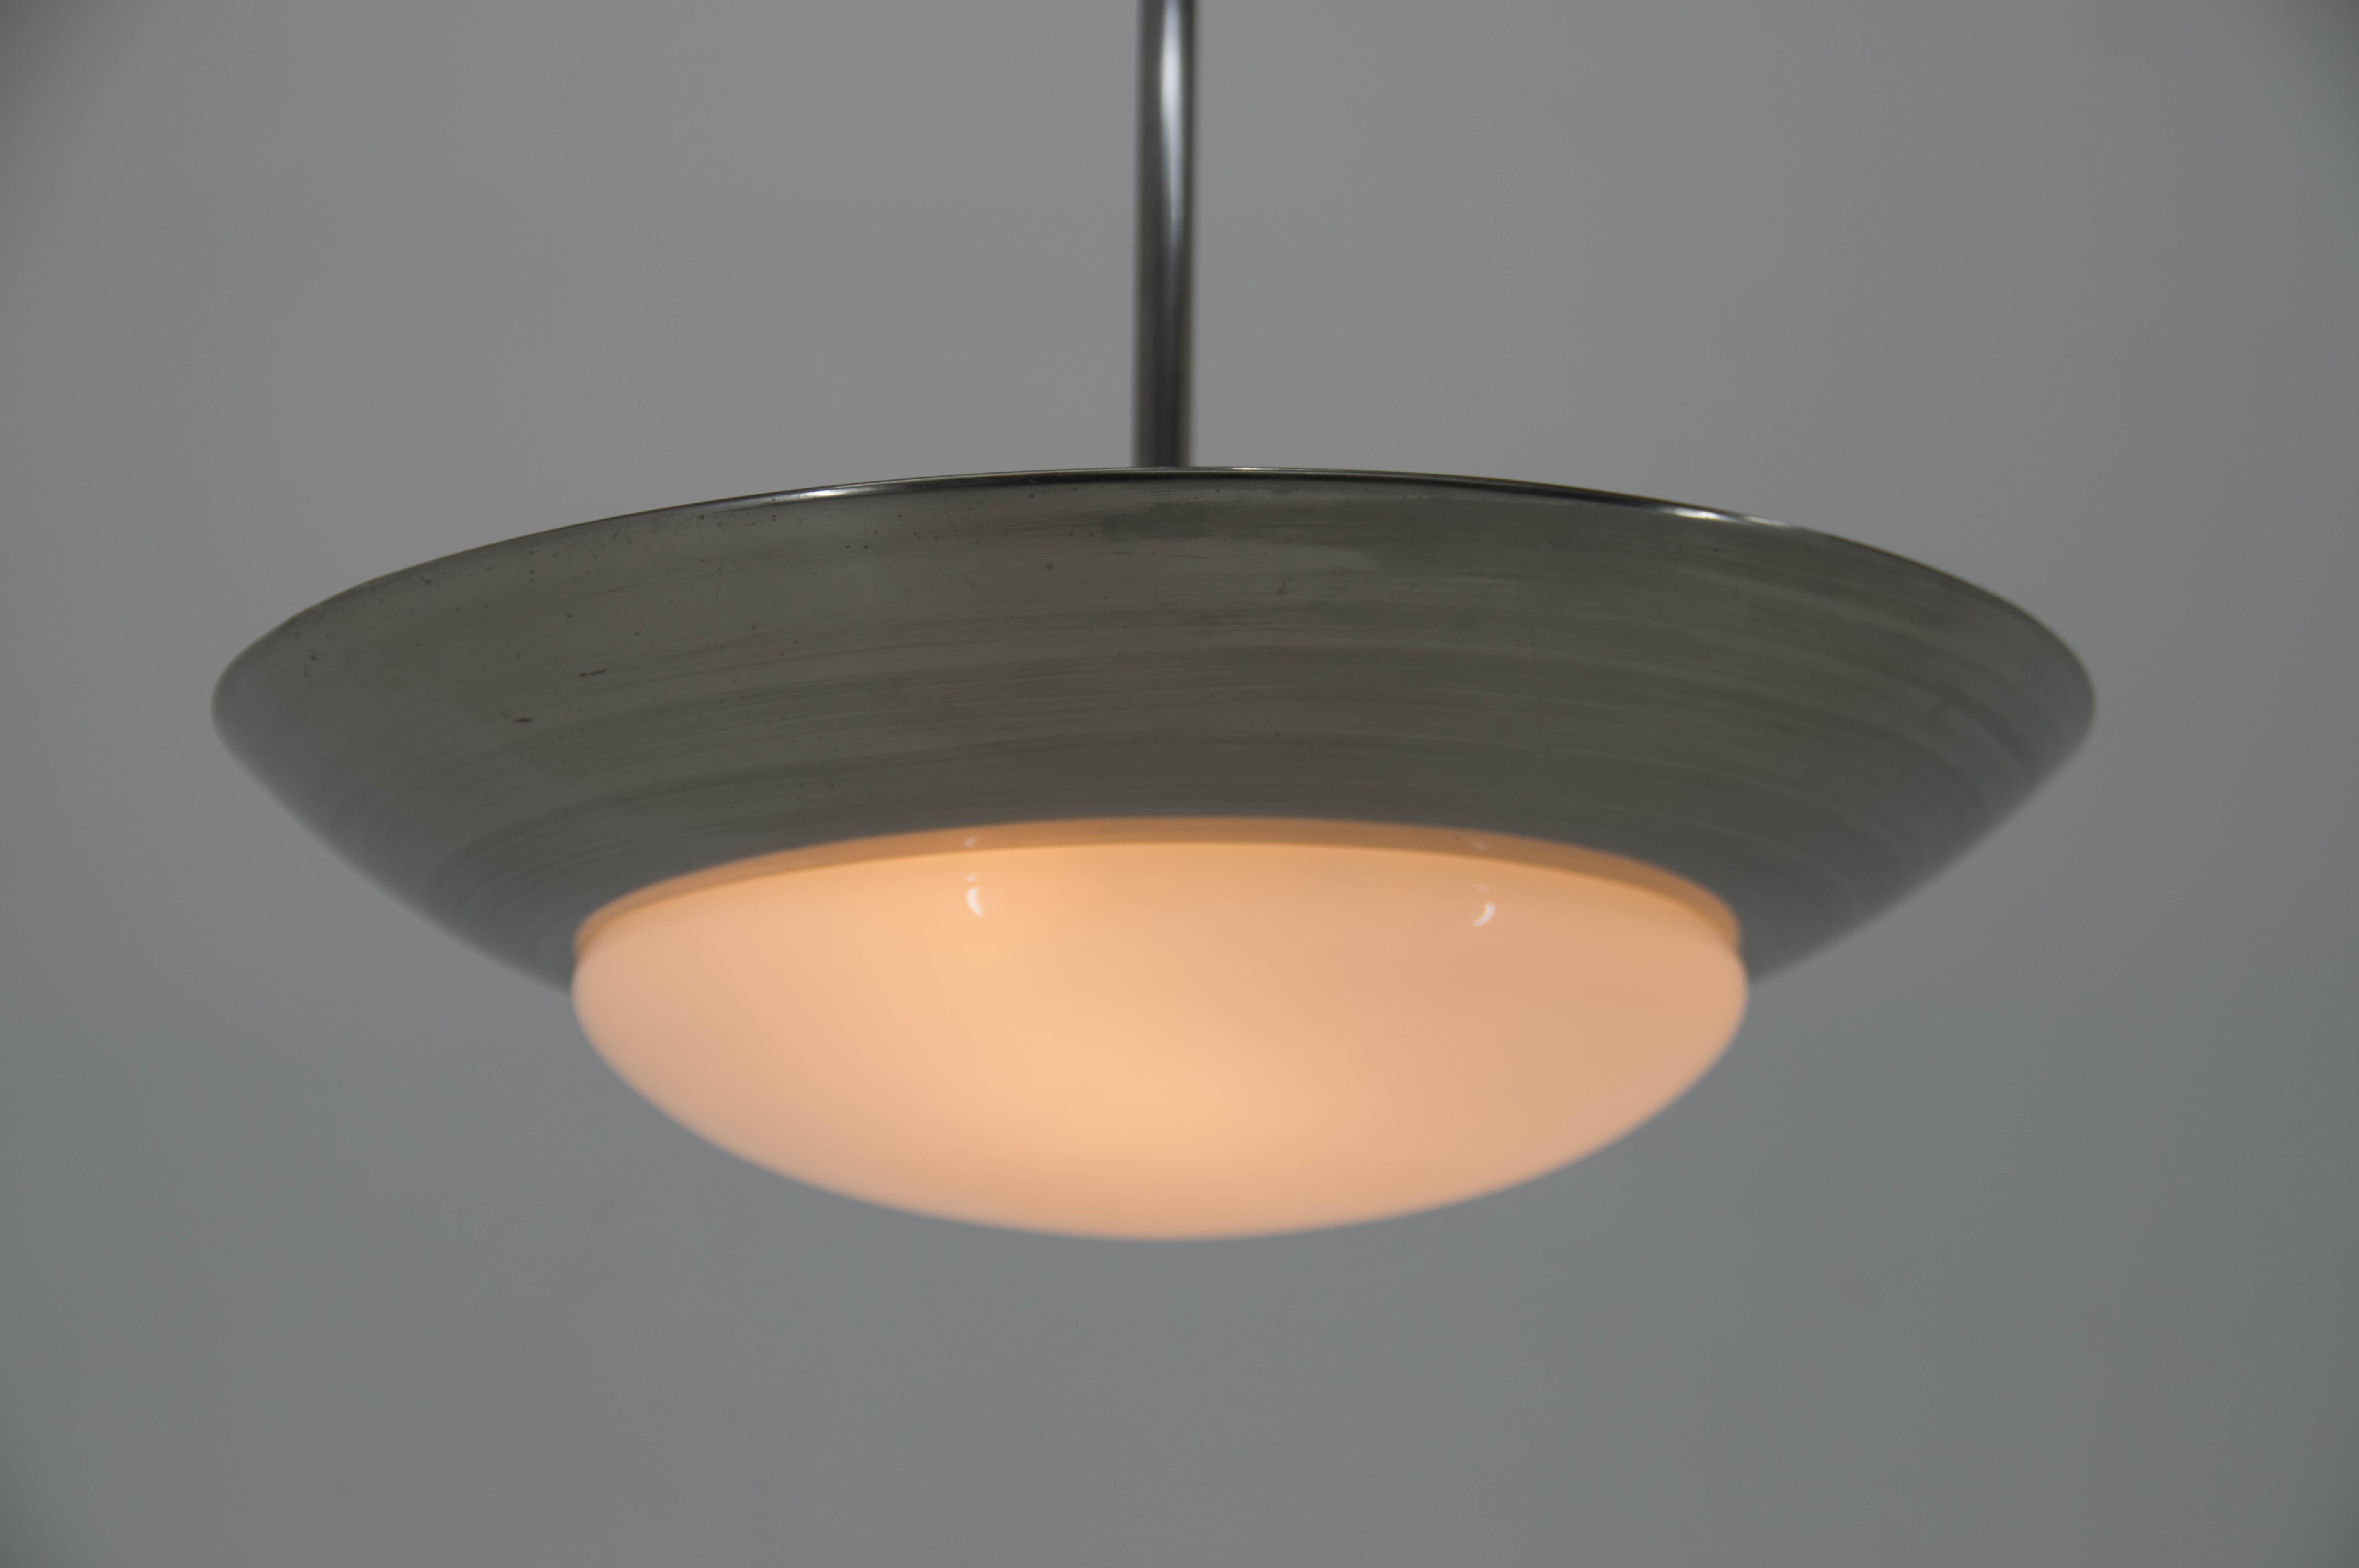 3-flamming chandelier UFO style by Franta Anyz for IAS.
Rewired, repolished
3x60W, E27 or E26 brass and ceramic sockets.